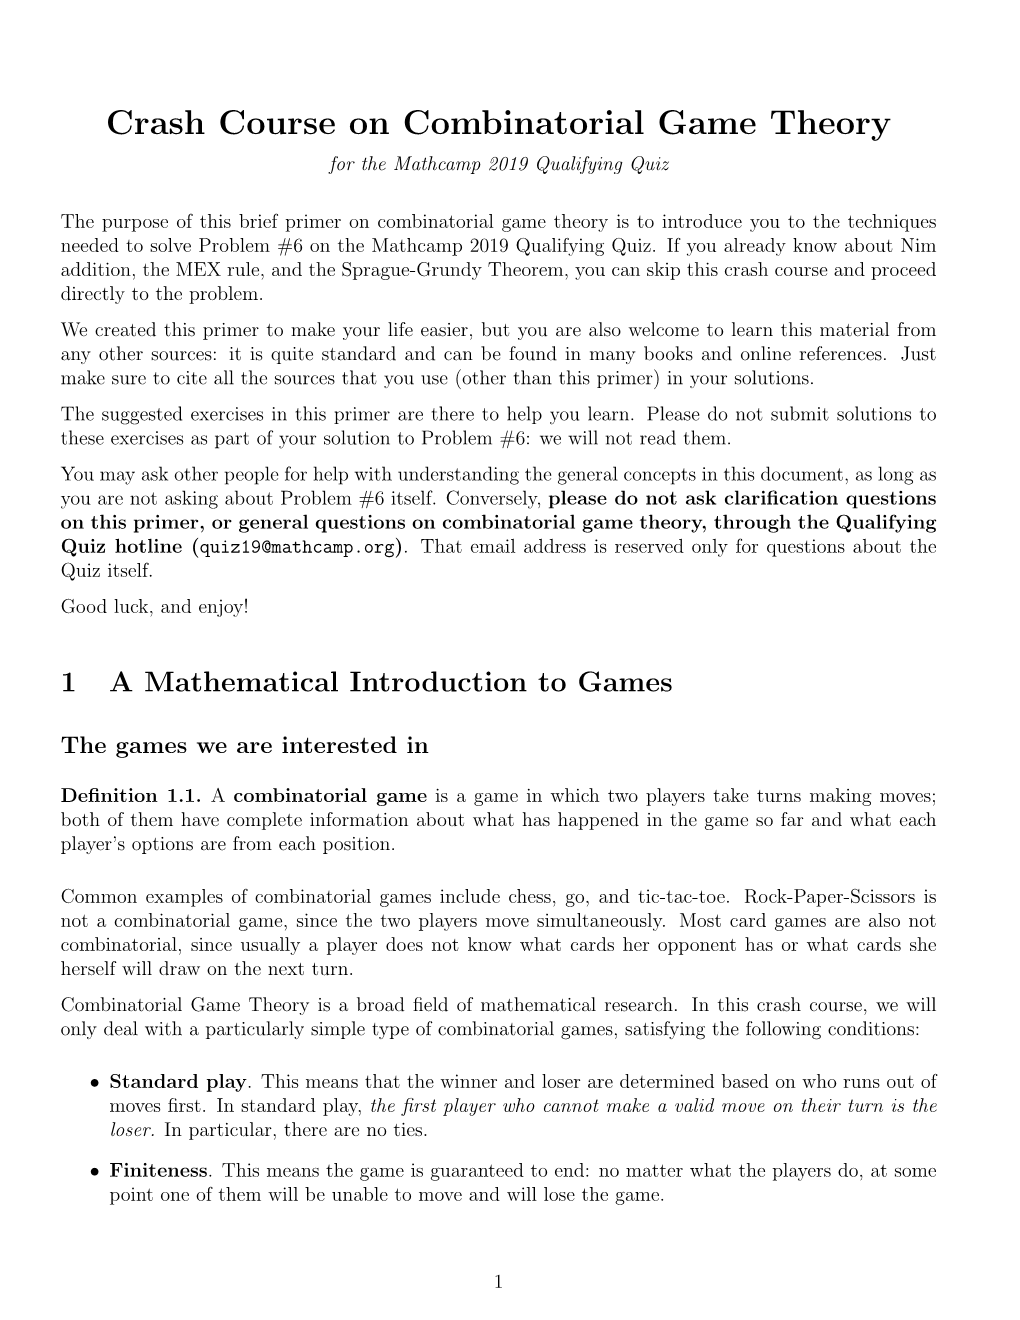 Crash Course on Combinatorial Game Theory for the Mathcamp 2019 Qualifying Quiz